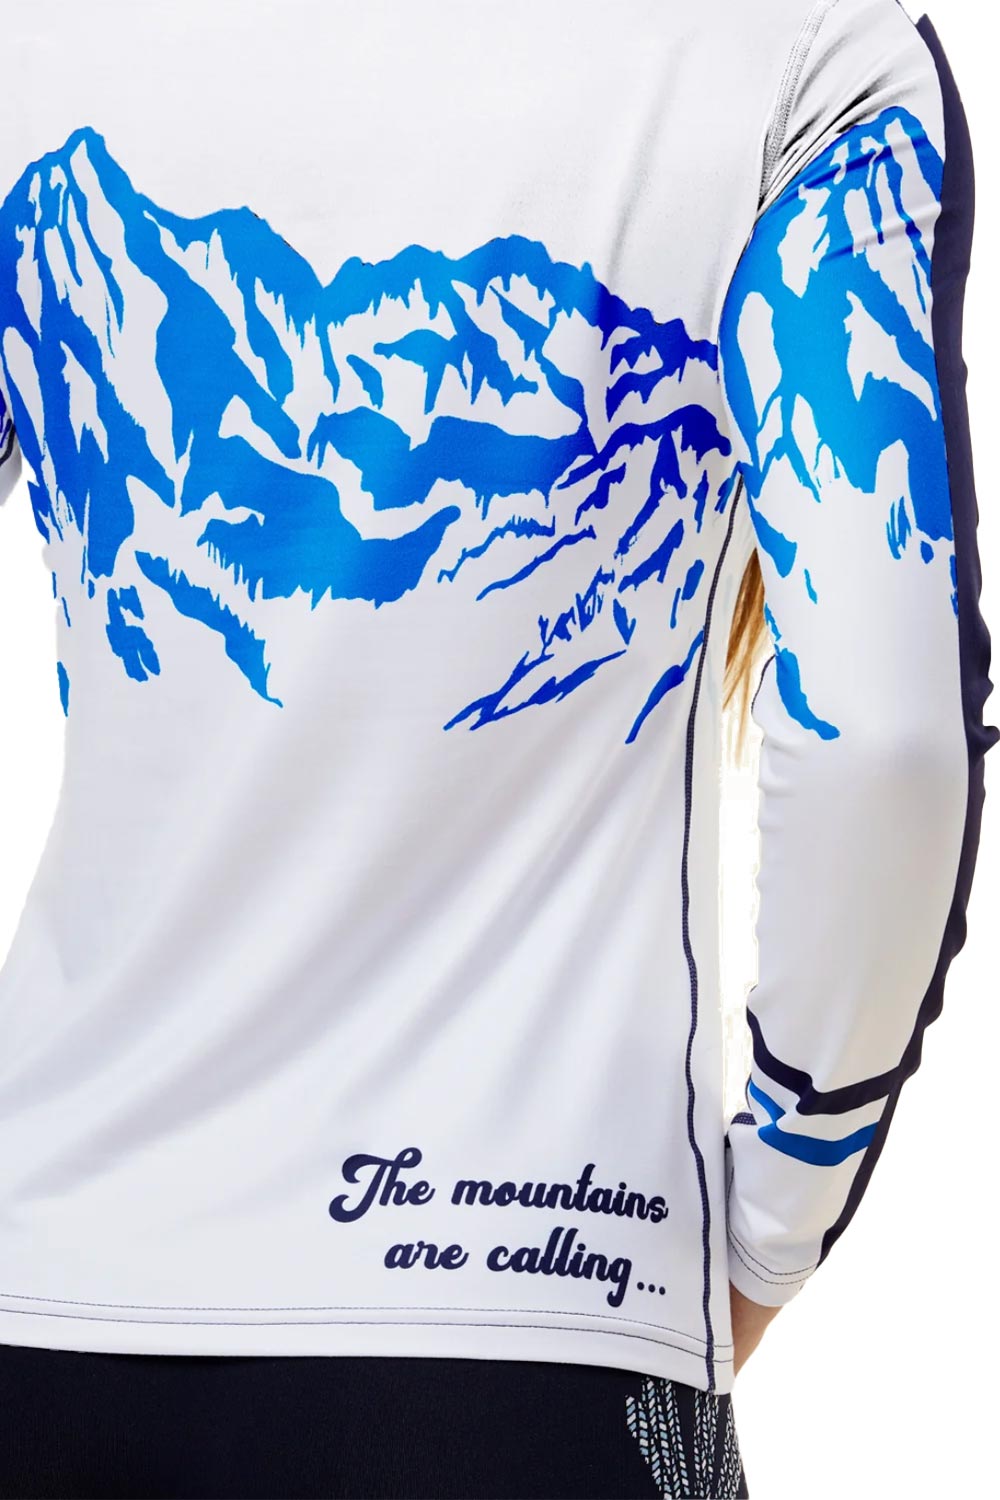 Krimson Klover base layer top, mountains graphic